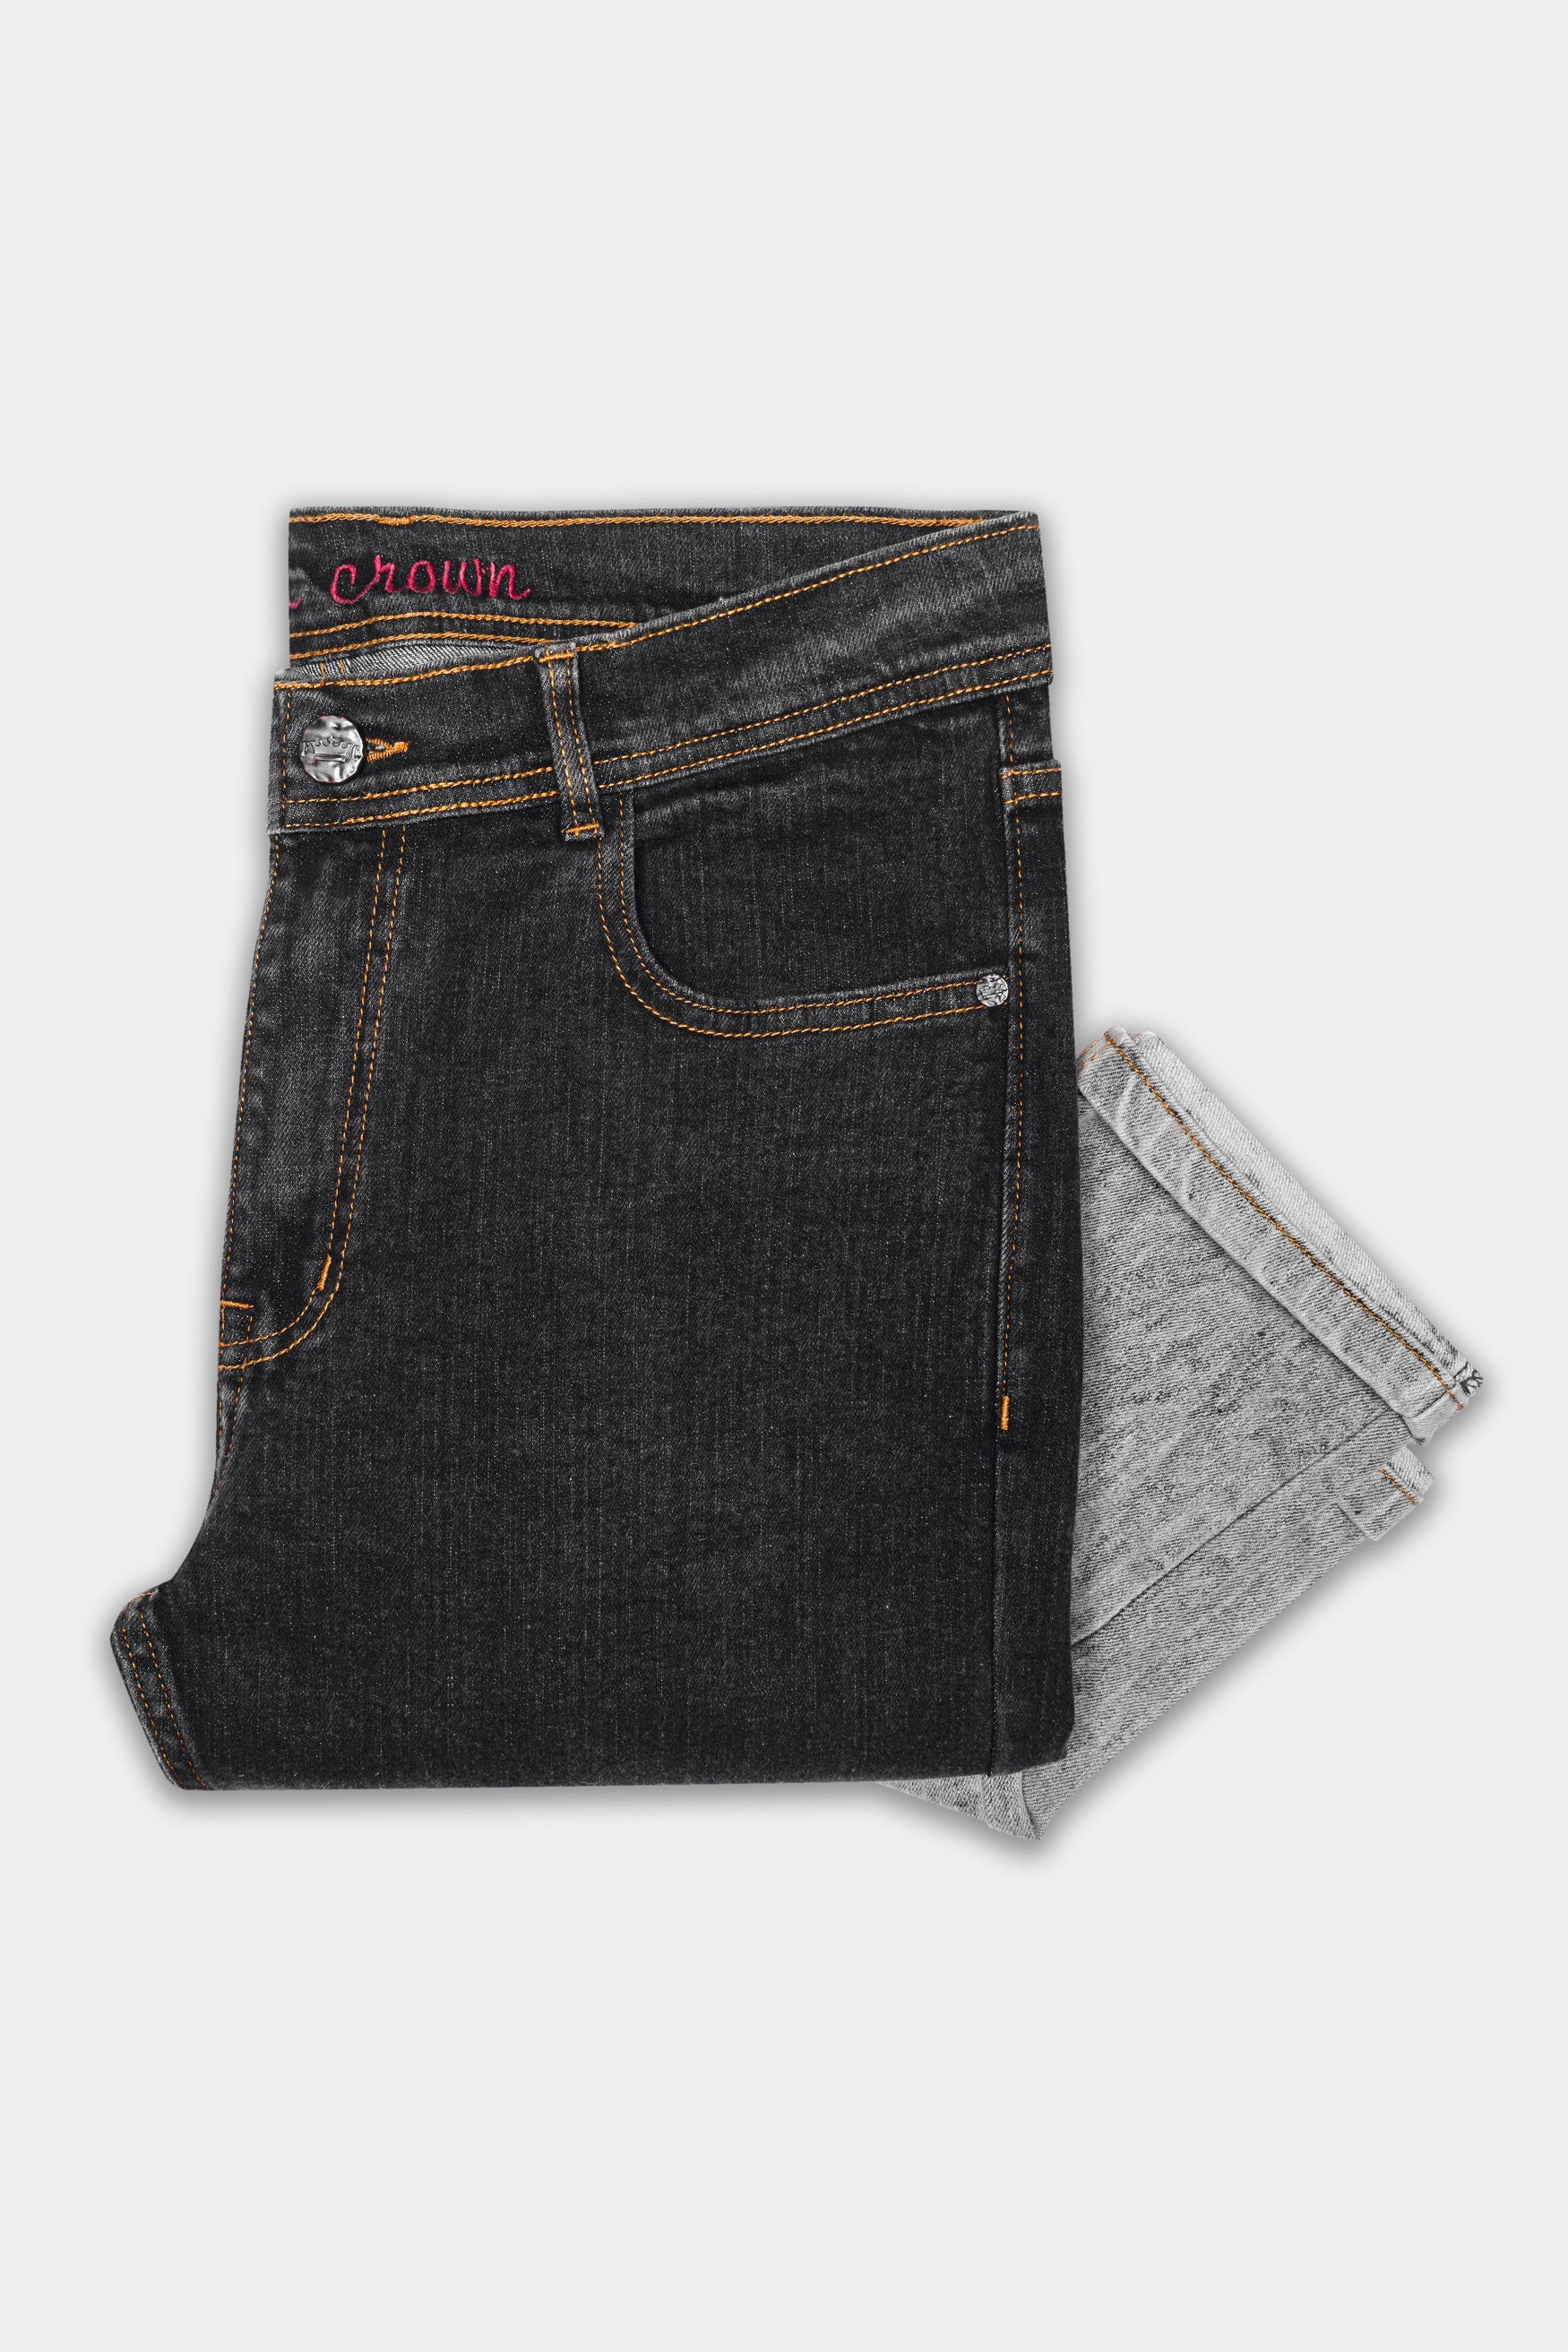 Shark Black and Martini Gray Heavily Washed Stretchable Denim